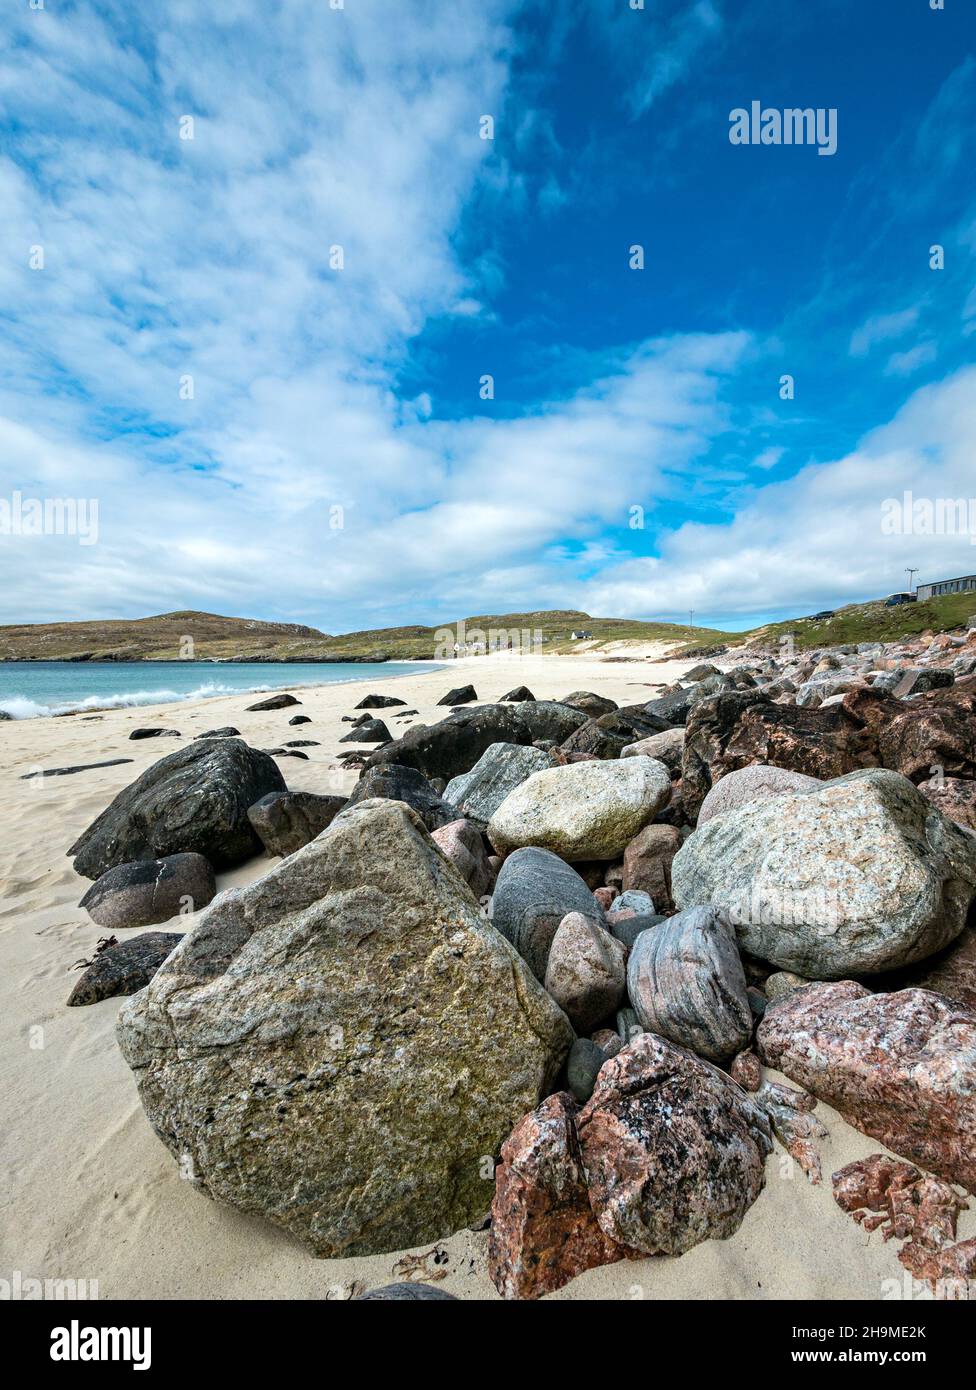 Pebbles, boulders and on the remote and beautiful deserted beach at Hushinish (Traigh Huisinis) in May, Isle of Harris, Outer Hebrides, Scotland, UK Stock Photo